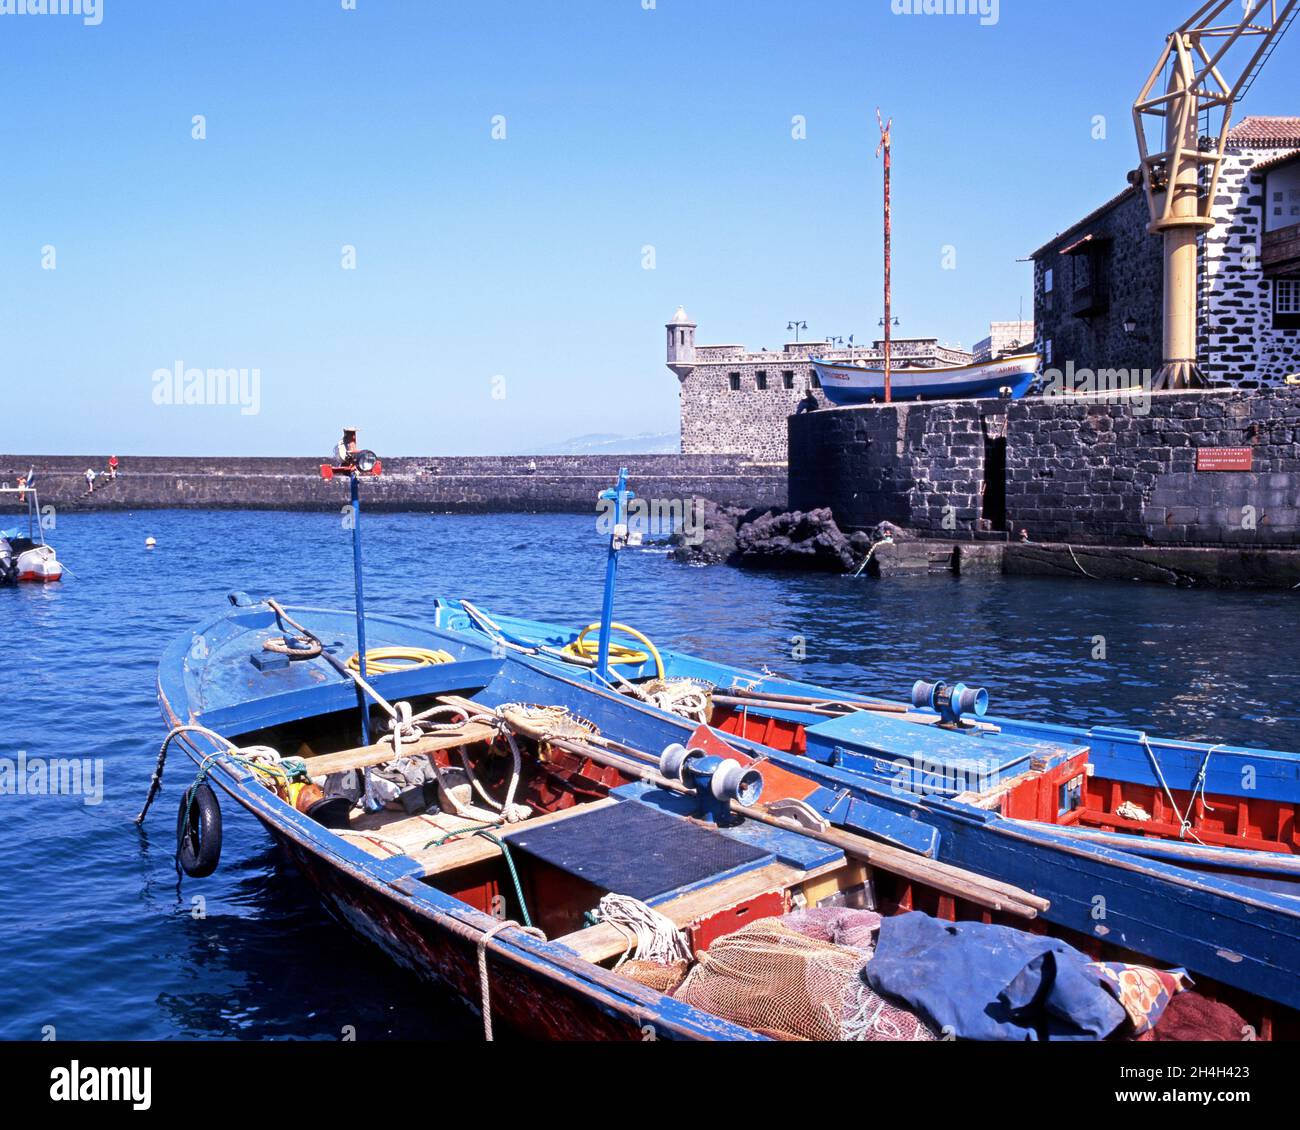 View of the harbour with fishing boats in the foreground, Puerto de la Cruz, Tenerife, Canary Islands, Spain. Stock Photo